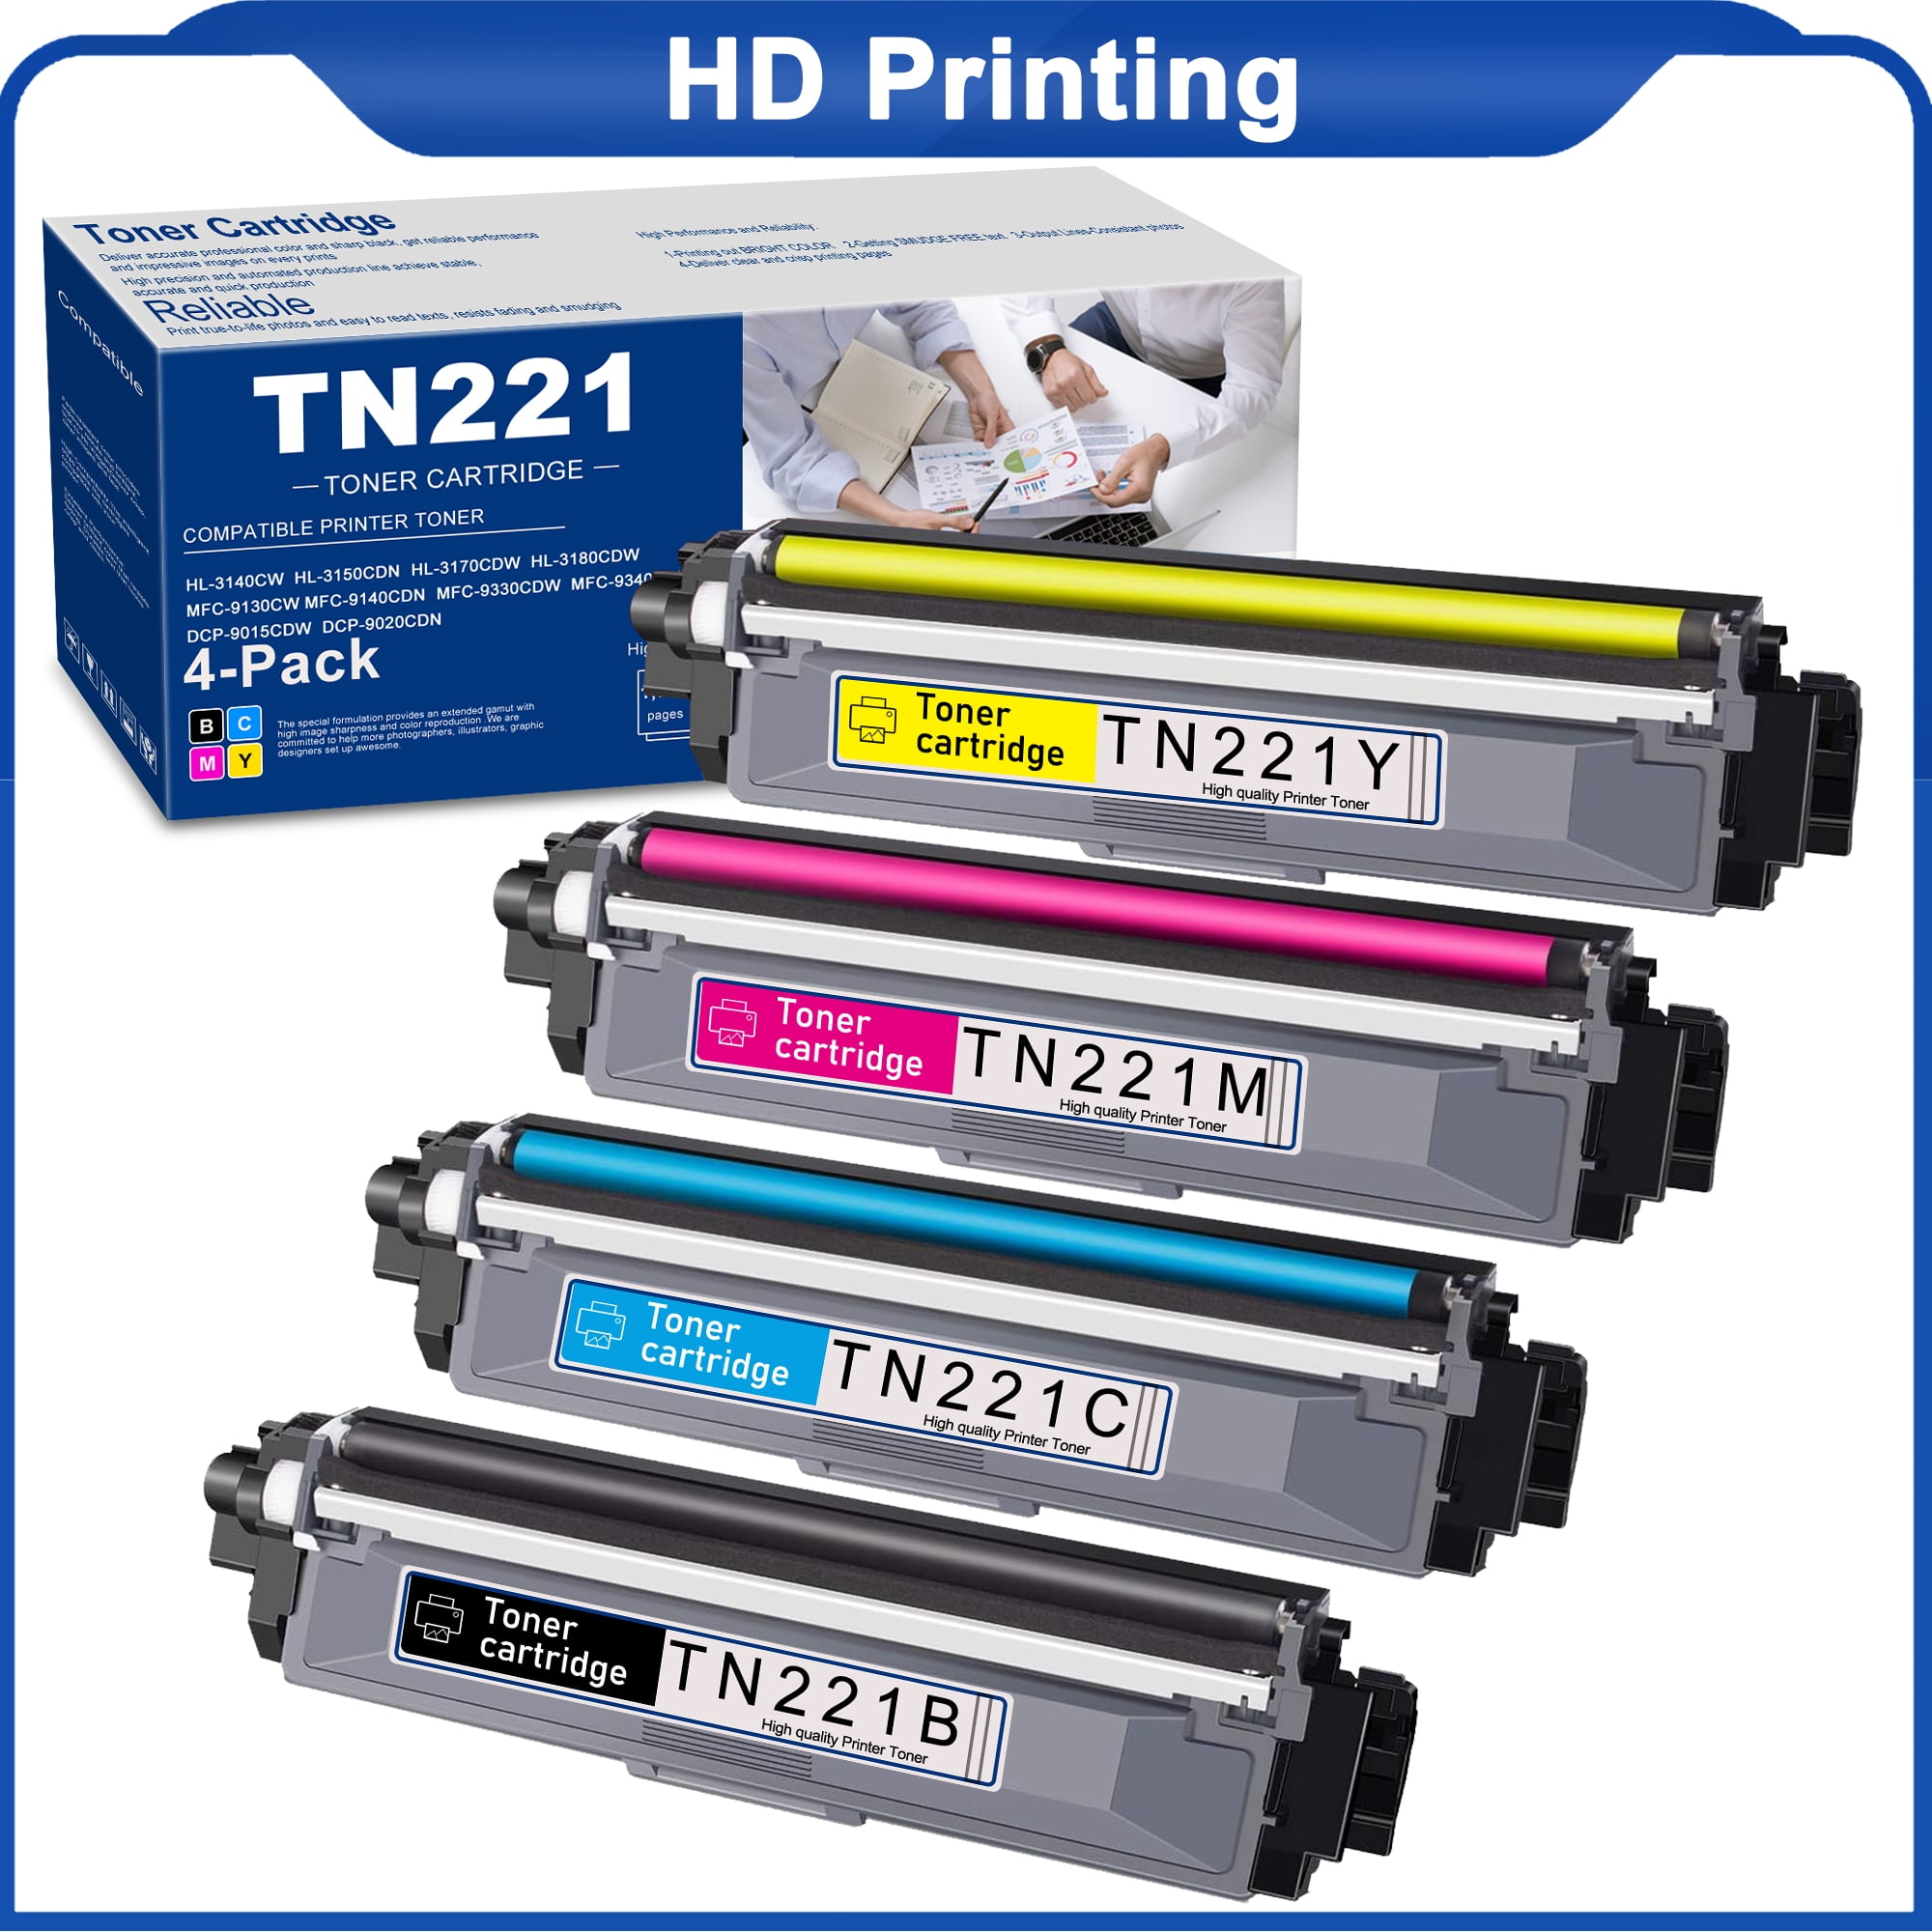 10PK TN221 Black Toner Compatible For Brother MFC-9340CDW MFC-9330CDW  HL-3140CW